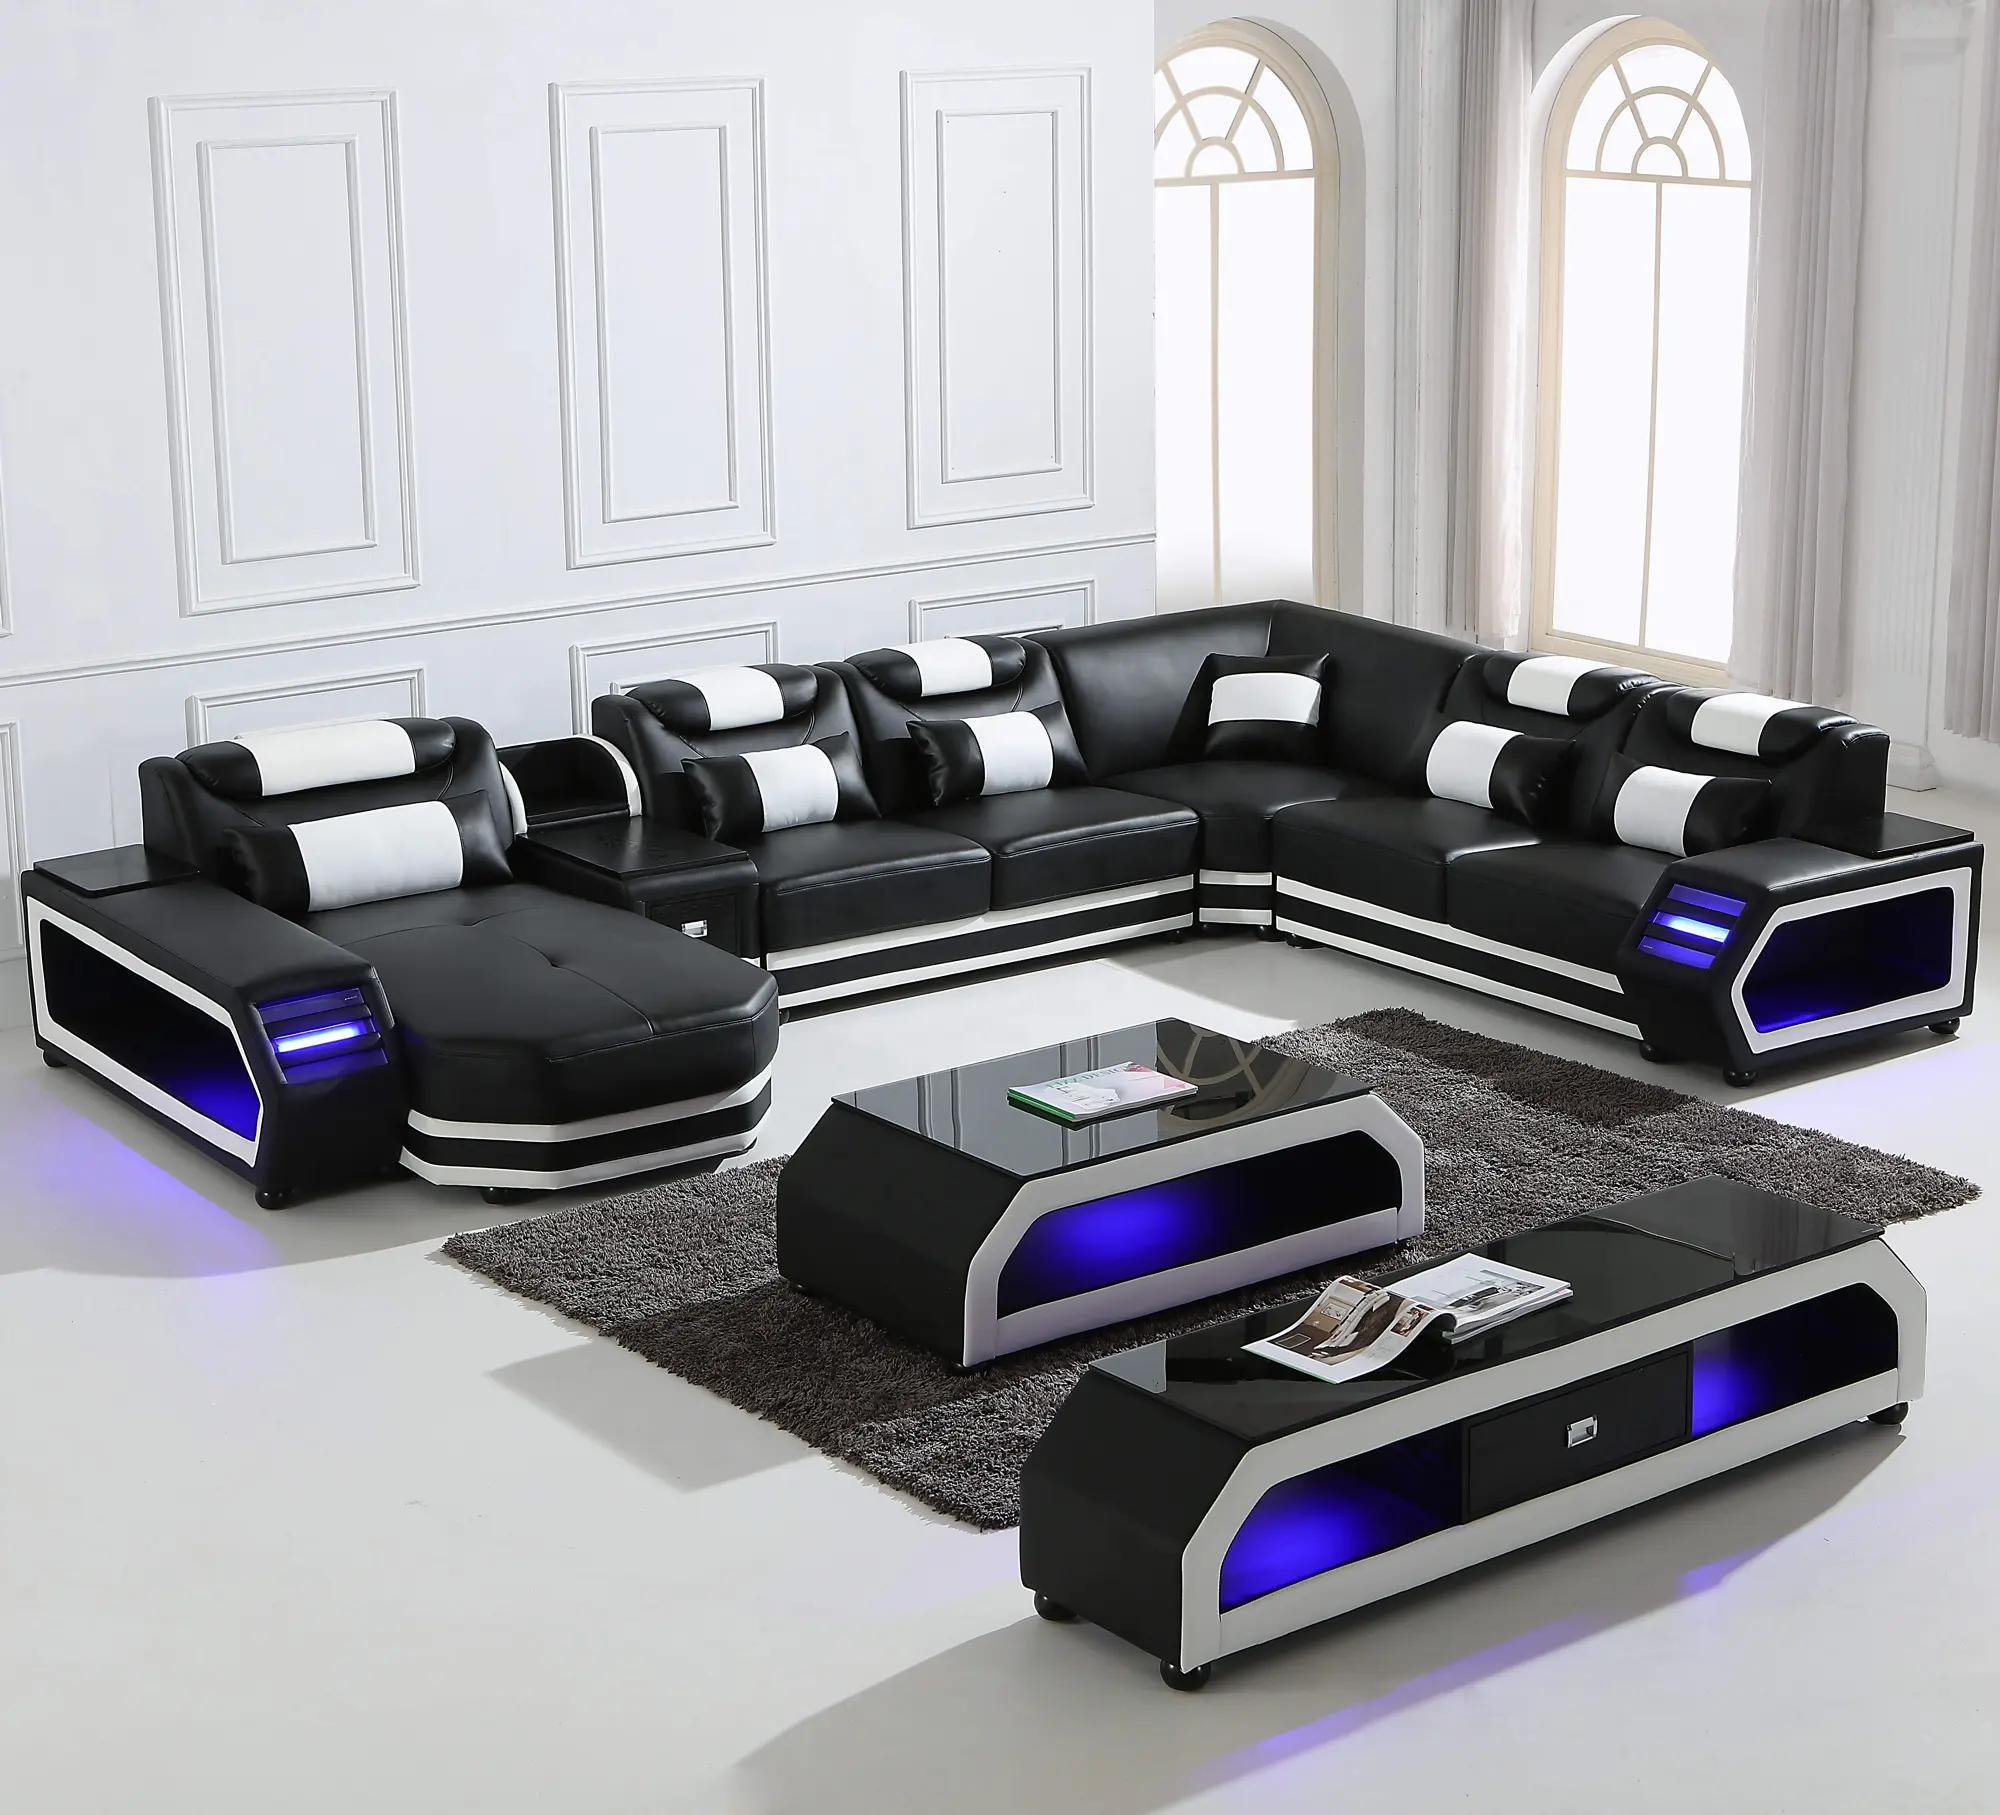 Sofa Set With Led Lights Leather Living Room Furniture U-Shaped Functional Sofa Set 7 Seater Sectional Sofa Modern Style